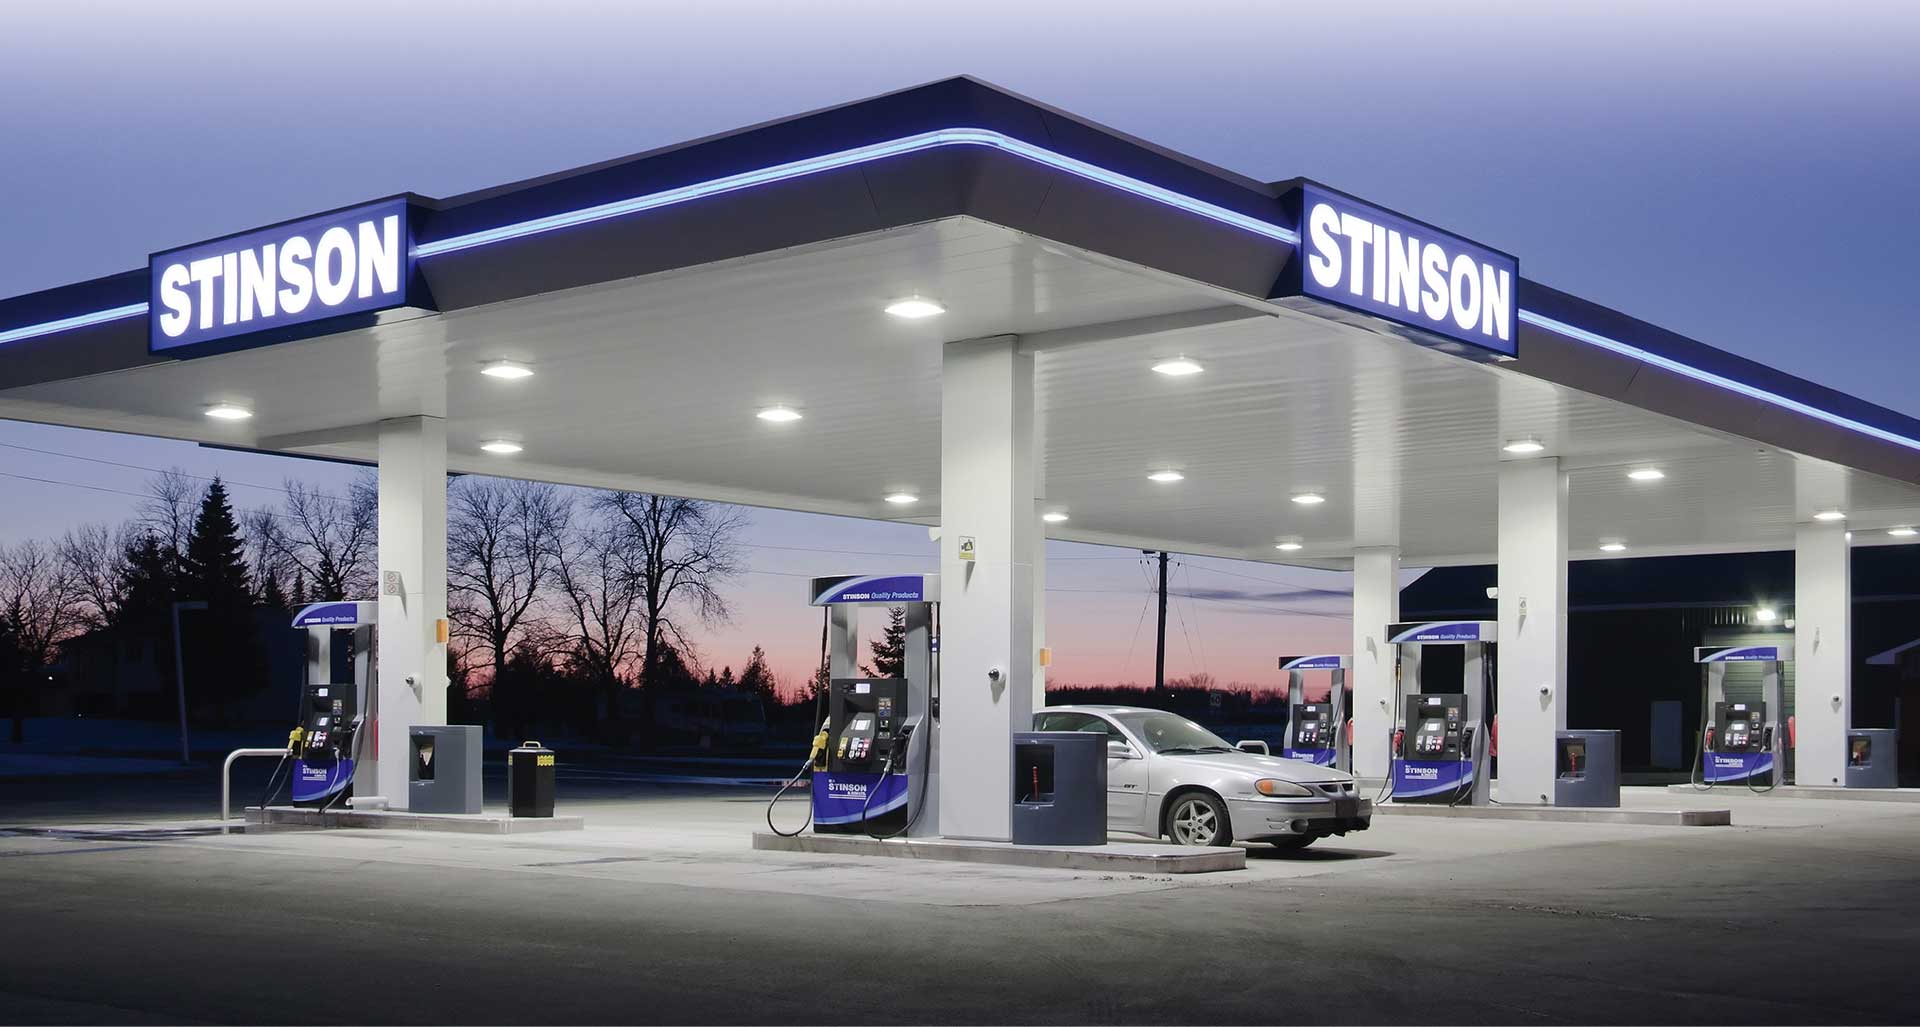 Image of a Stinson gas station